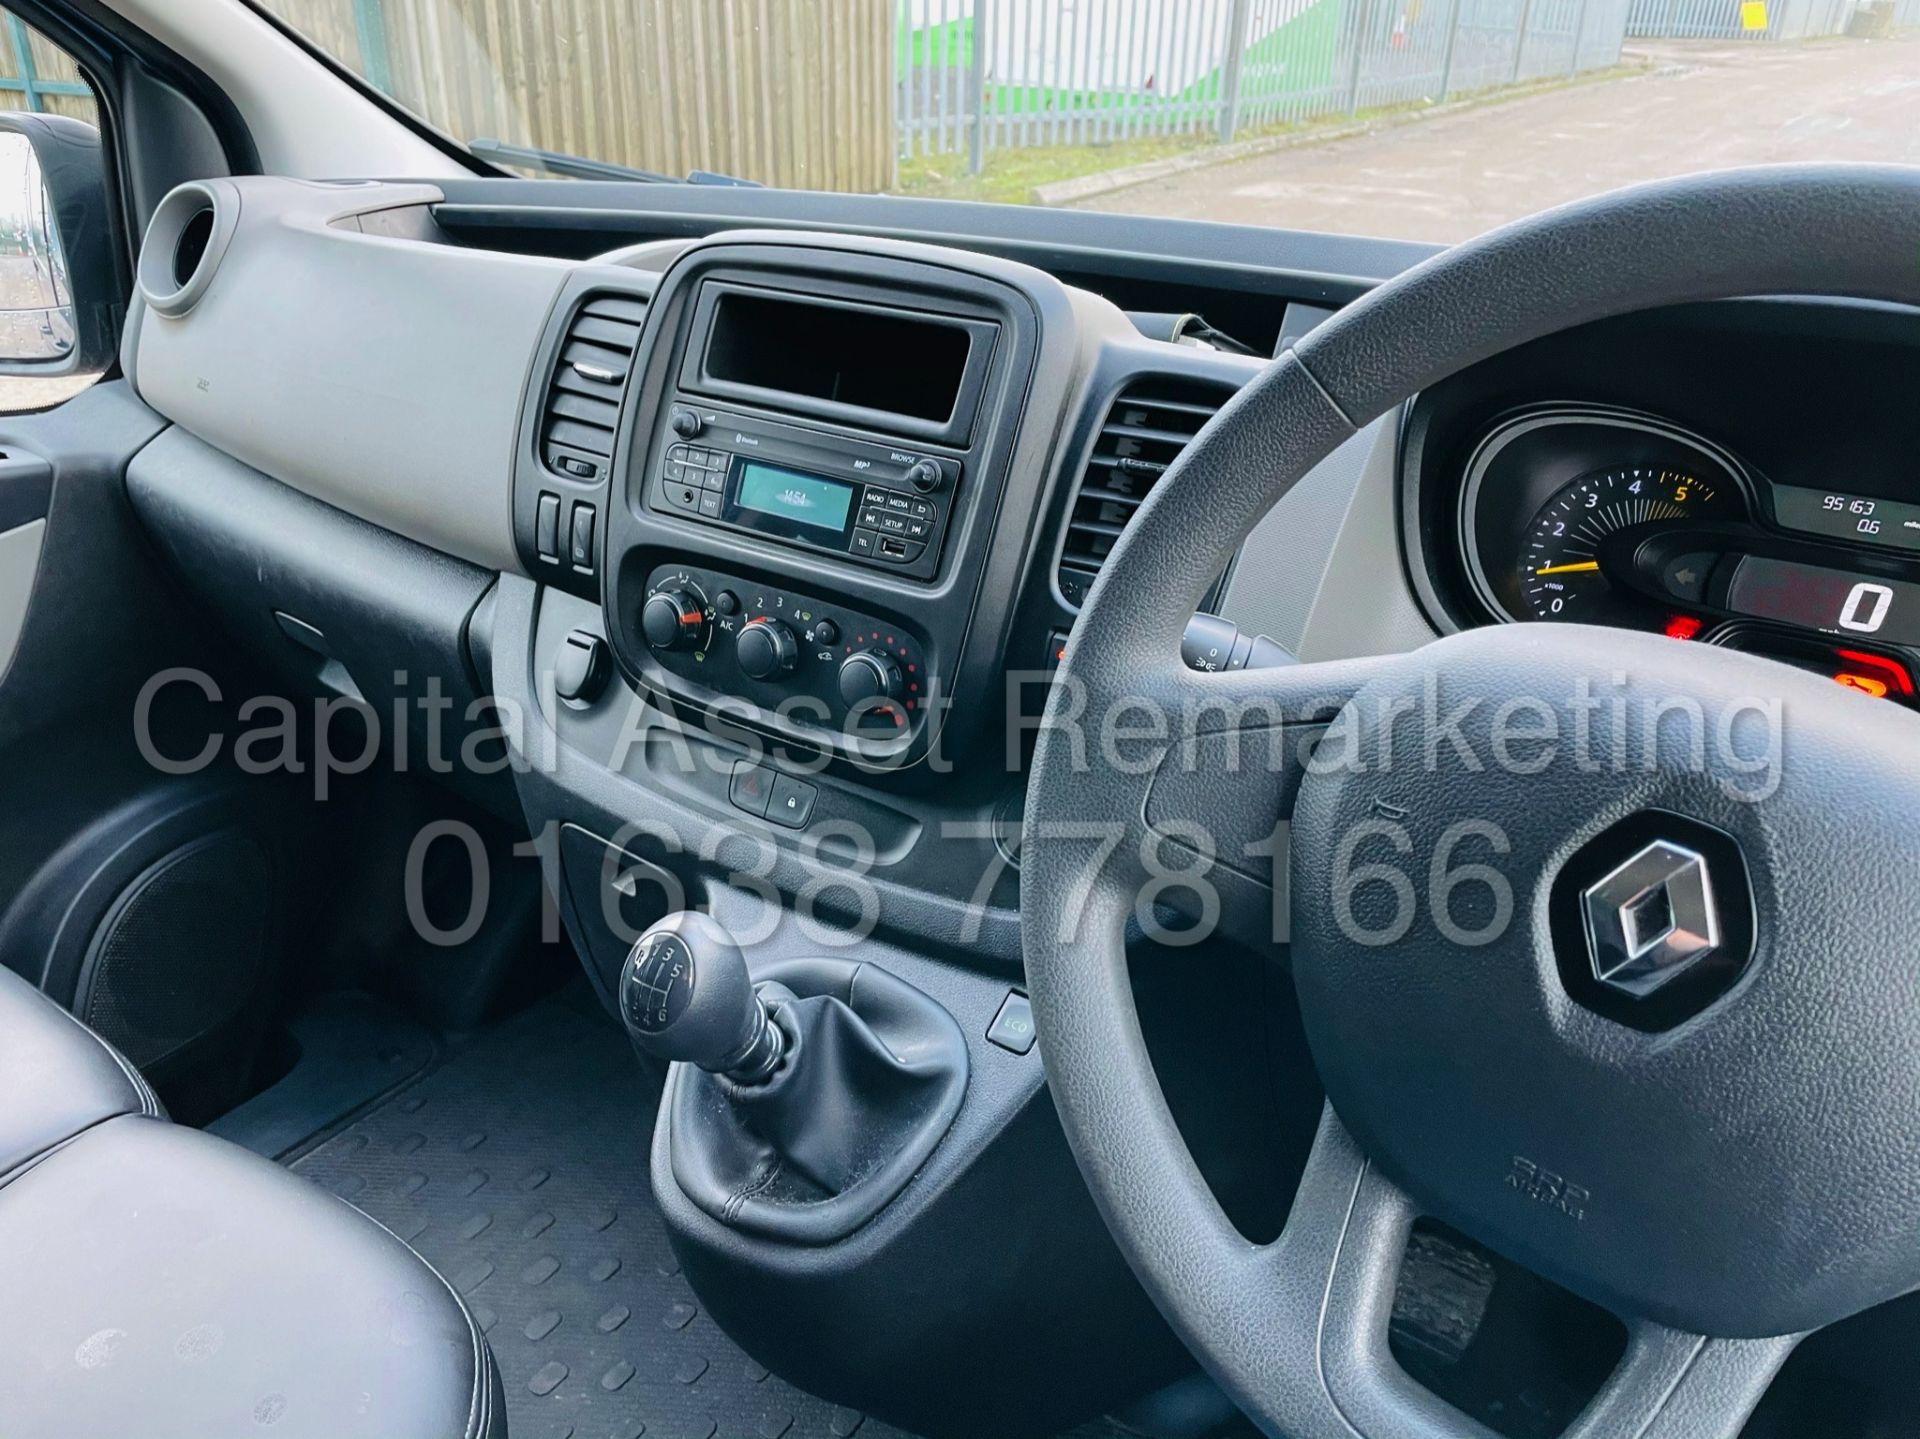 RENAULT TRAFIC *LWB - 9 SEATER MPV / BUS* (2017 - EURO 6) '1.6 DCI - 6 SPEED' *AIR CON* (NO VAT) - Image 38 of 47